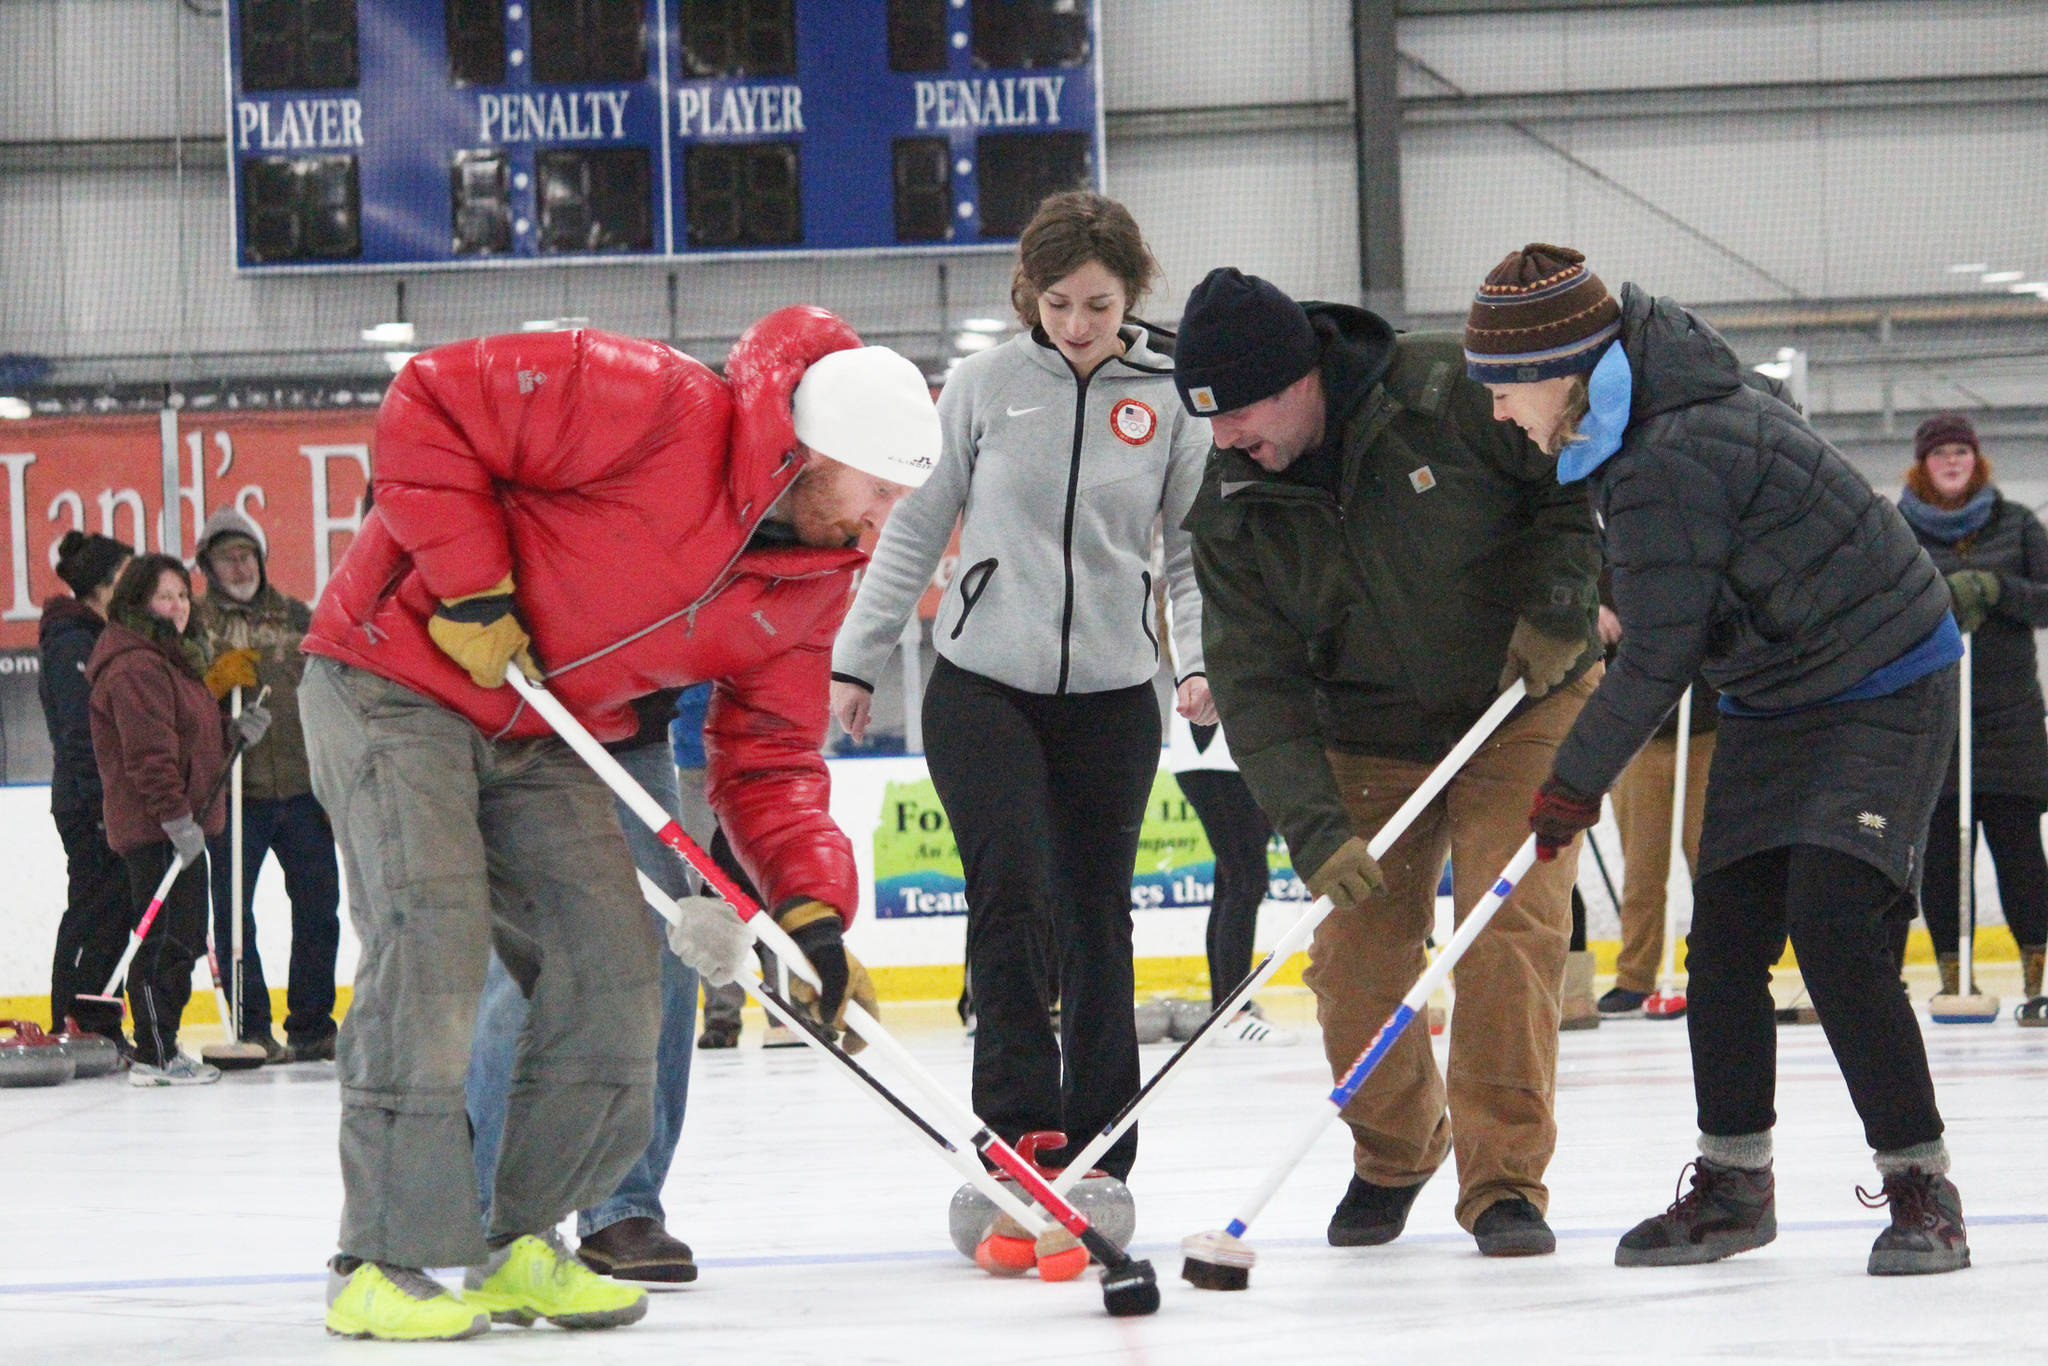 Former Olympic curler Jessica Schultz coaches a group of people as they practice sweeping a curling stone Saturday, Jan. 12, 2019 at the Kevin Bell Ice Arena in Homer, Alaska during a fundraiser event for the Homer Curling Club. (Photo by Megan Pacer/Homer News)